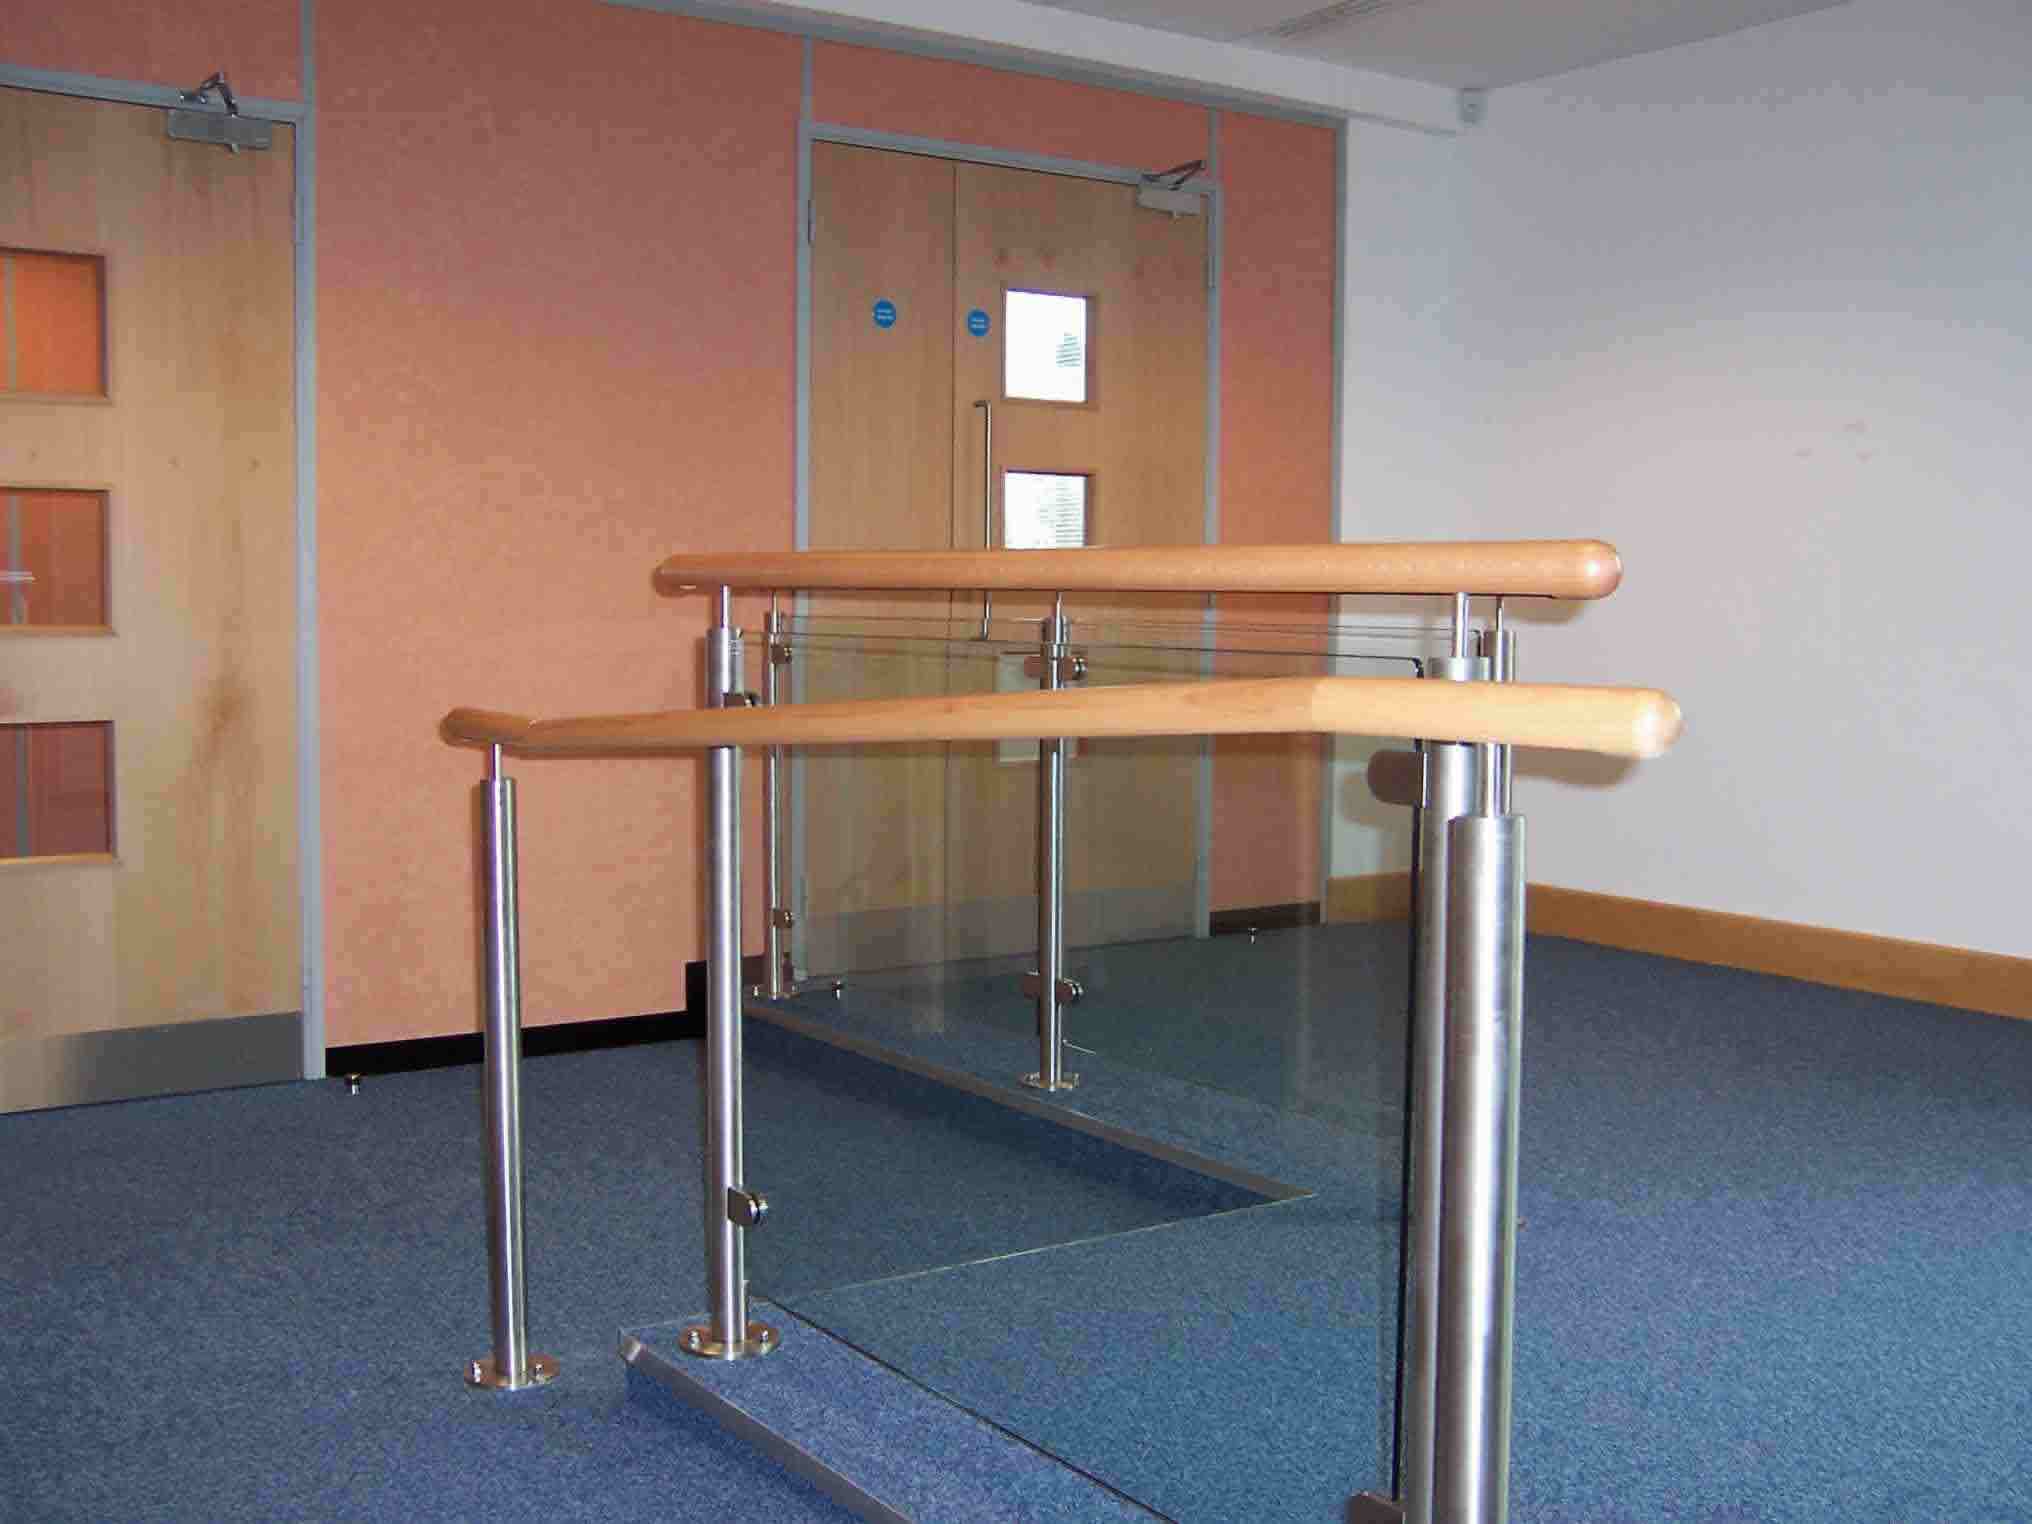 Balustrading & handrails provide accessibility in a modern office.